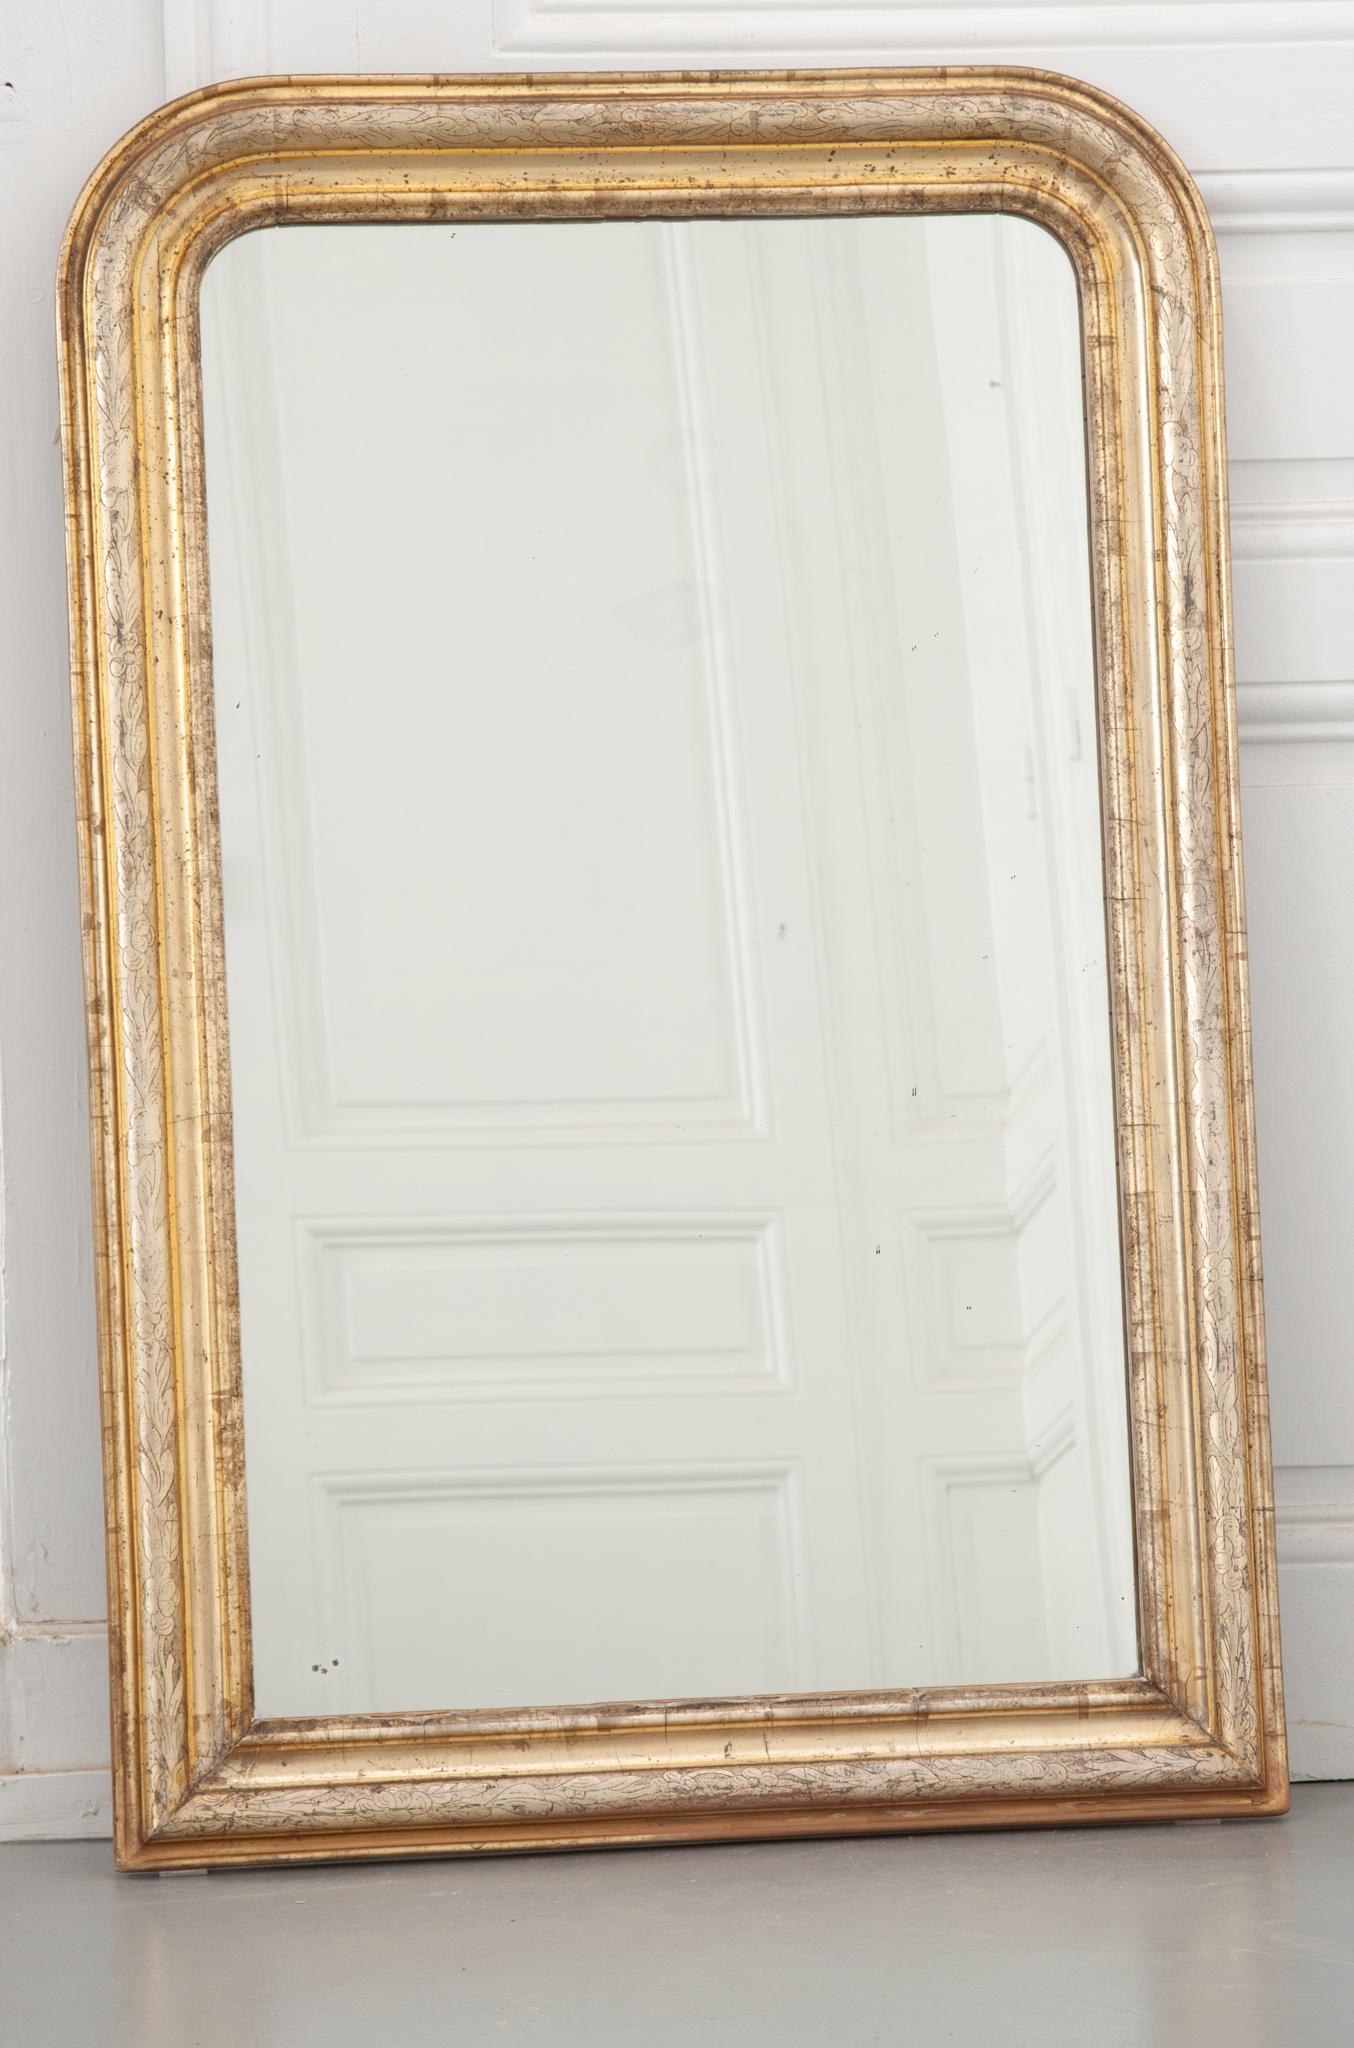 A fabulously patinated Louis Philippe style mirror. A delicate border of etched flowers surrounds the original mercury mirror plate with simple elegance. The contrast of gold and silver luster give this mirror a unique look. The original mirror